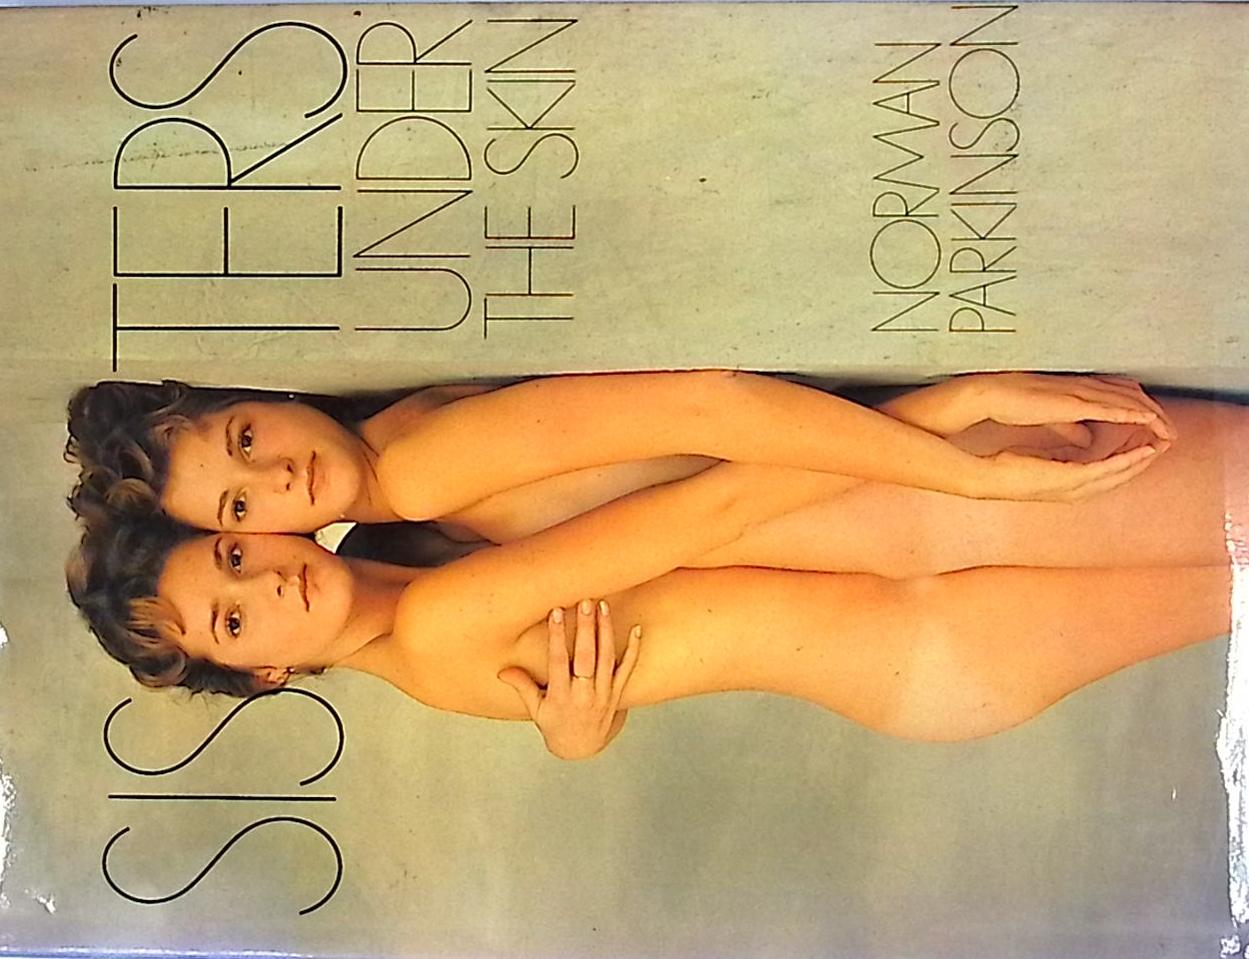 Sisters Under the Skin. Signed copy.